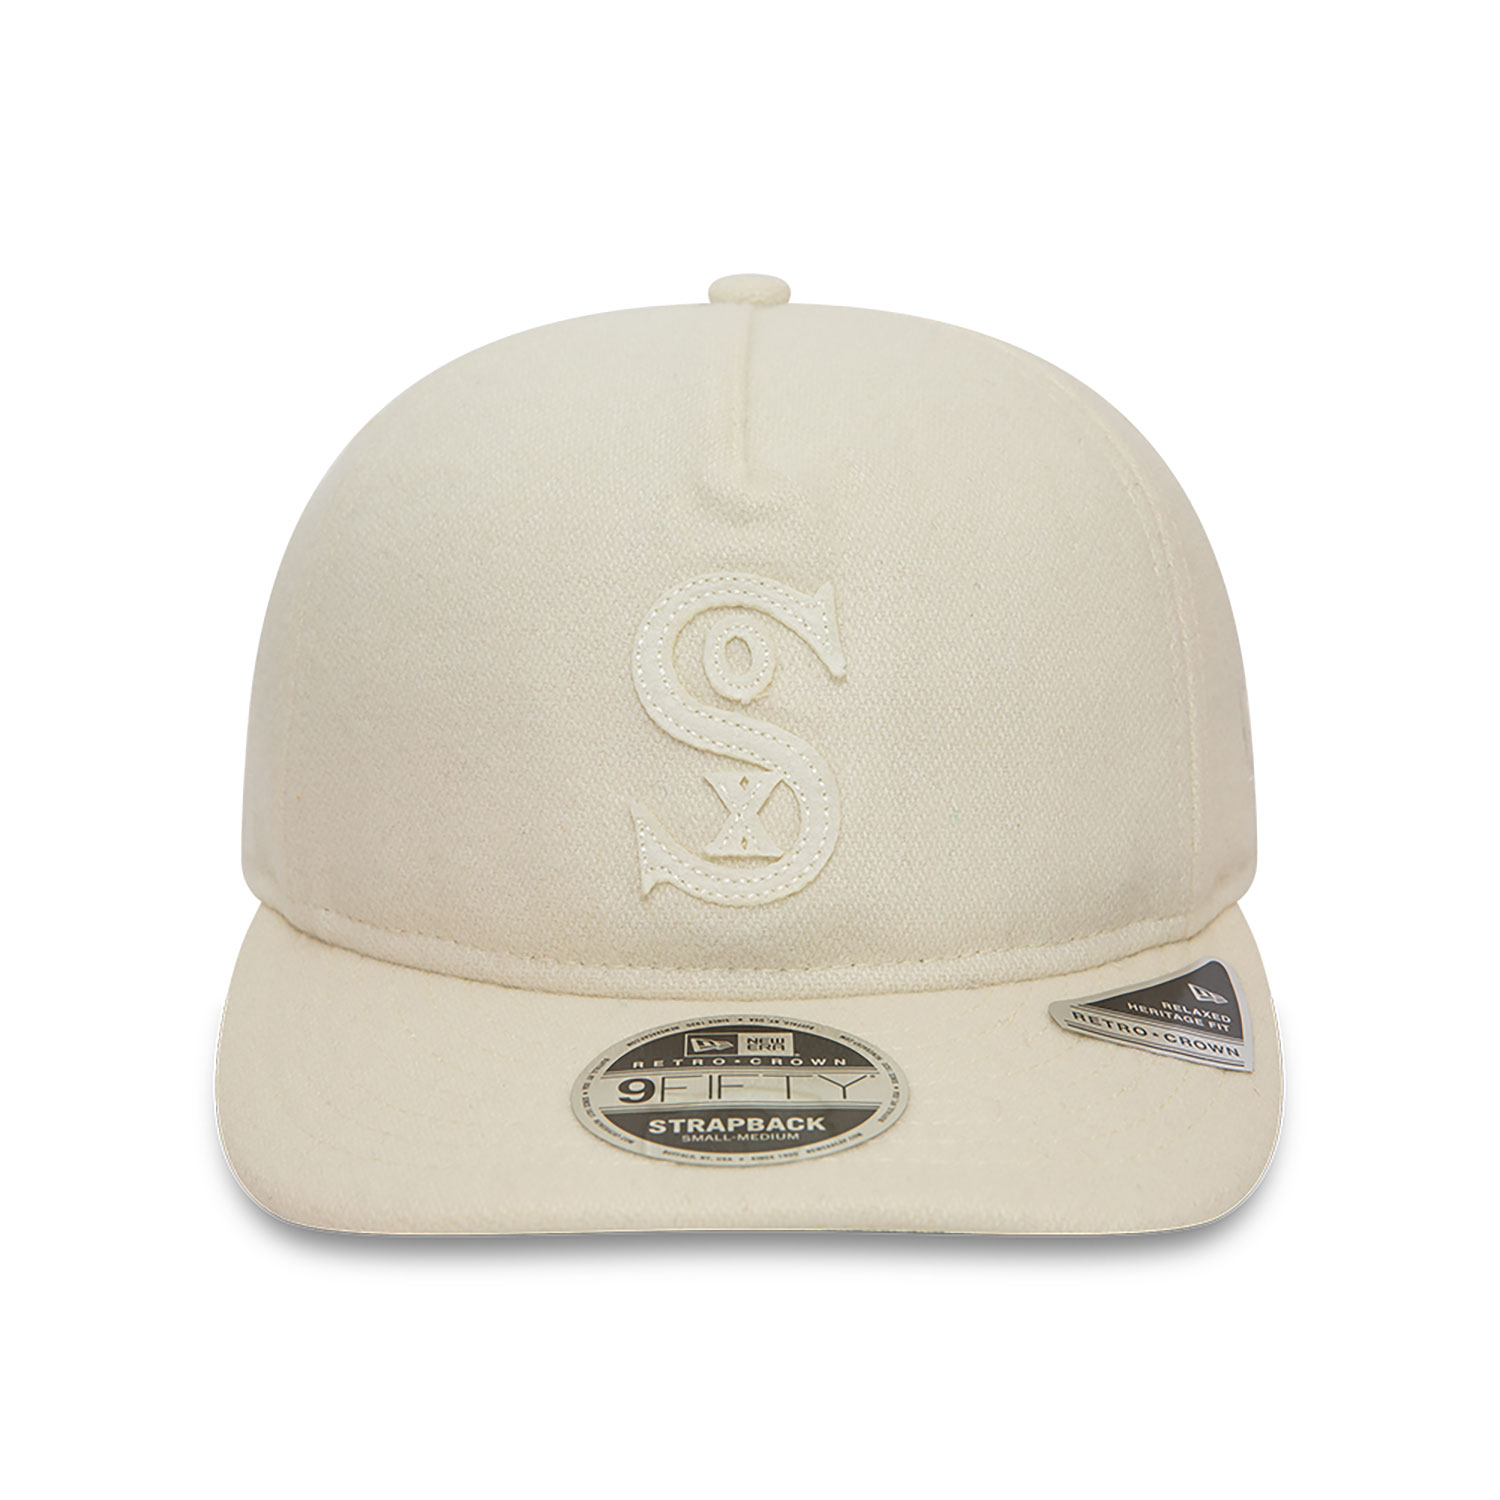 Chicago White Sox MLB Cooperstown Off White Retrocrown 9FIFTY Strapback Cap